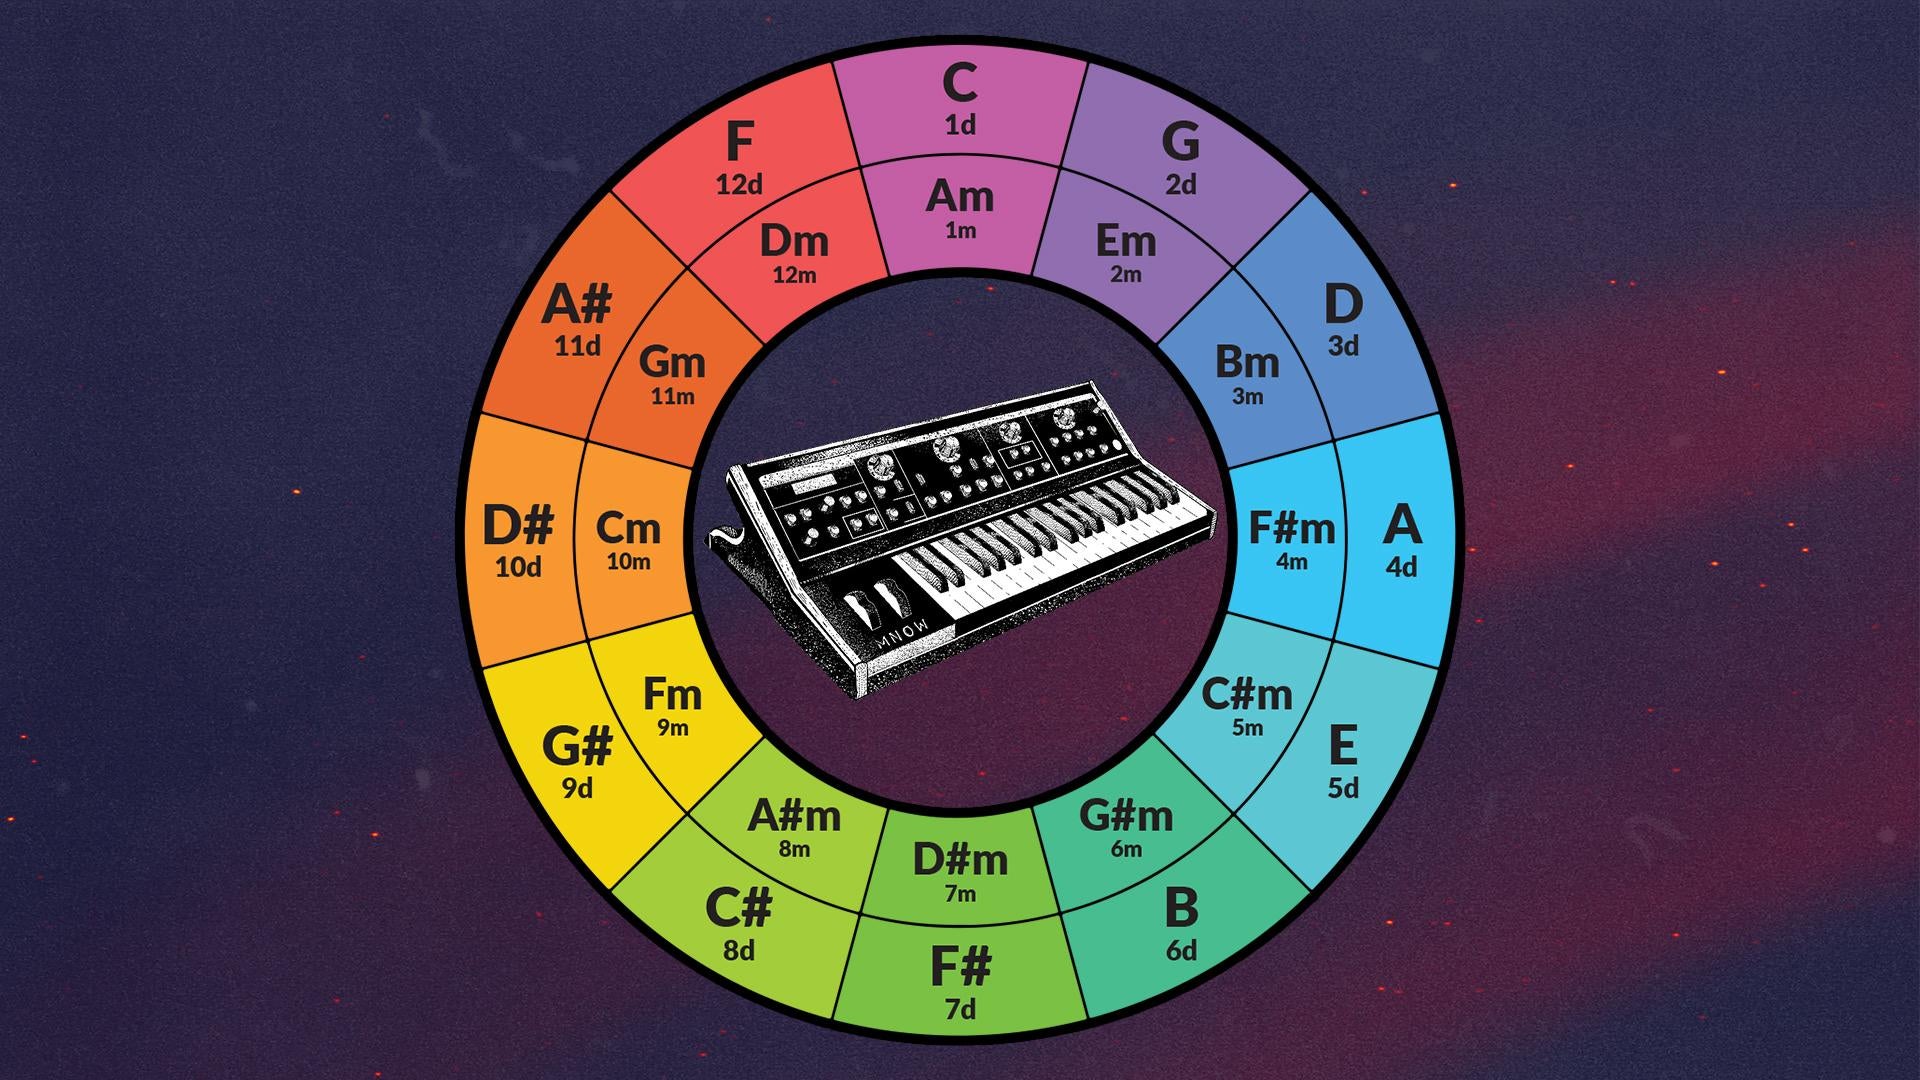 Nice circle of fifths wallpaper with moog synth in the middle style. #enjoy ;)